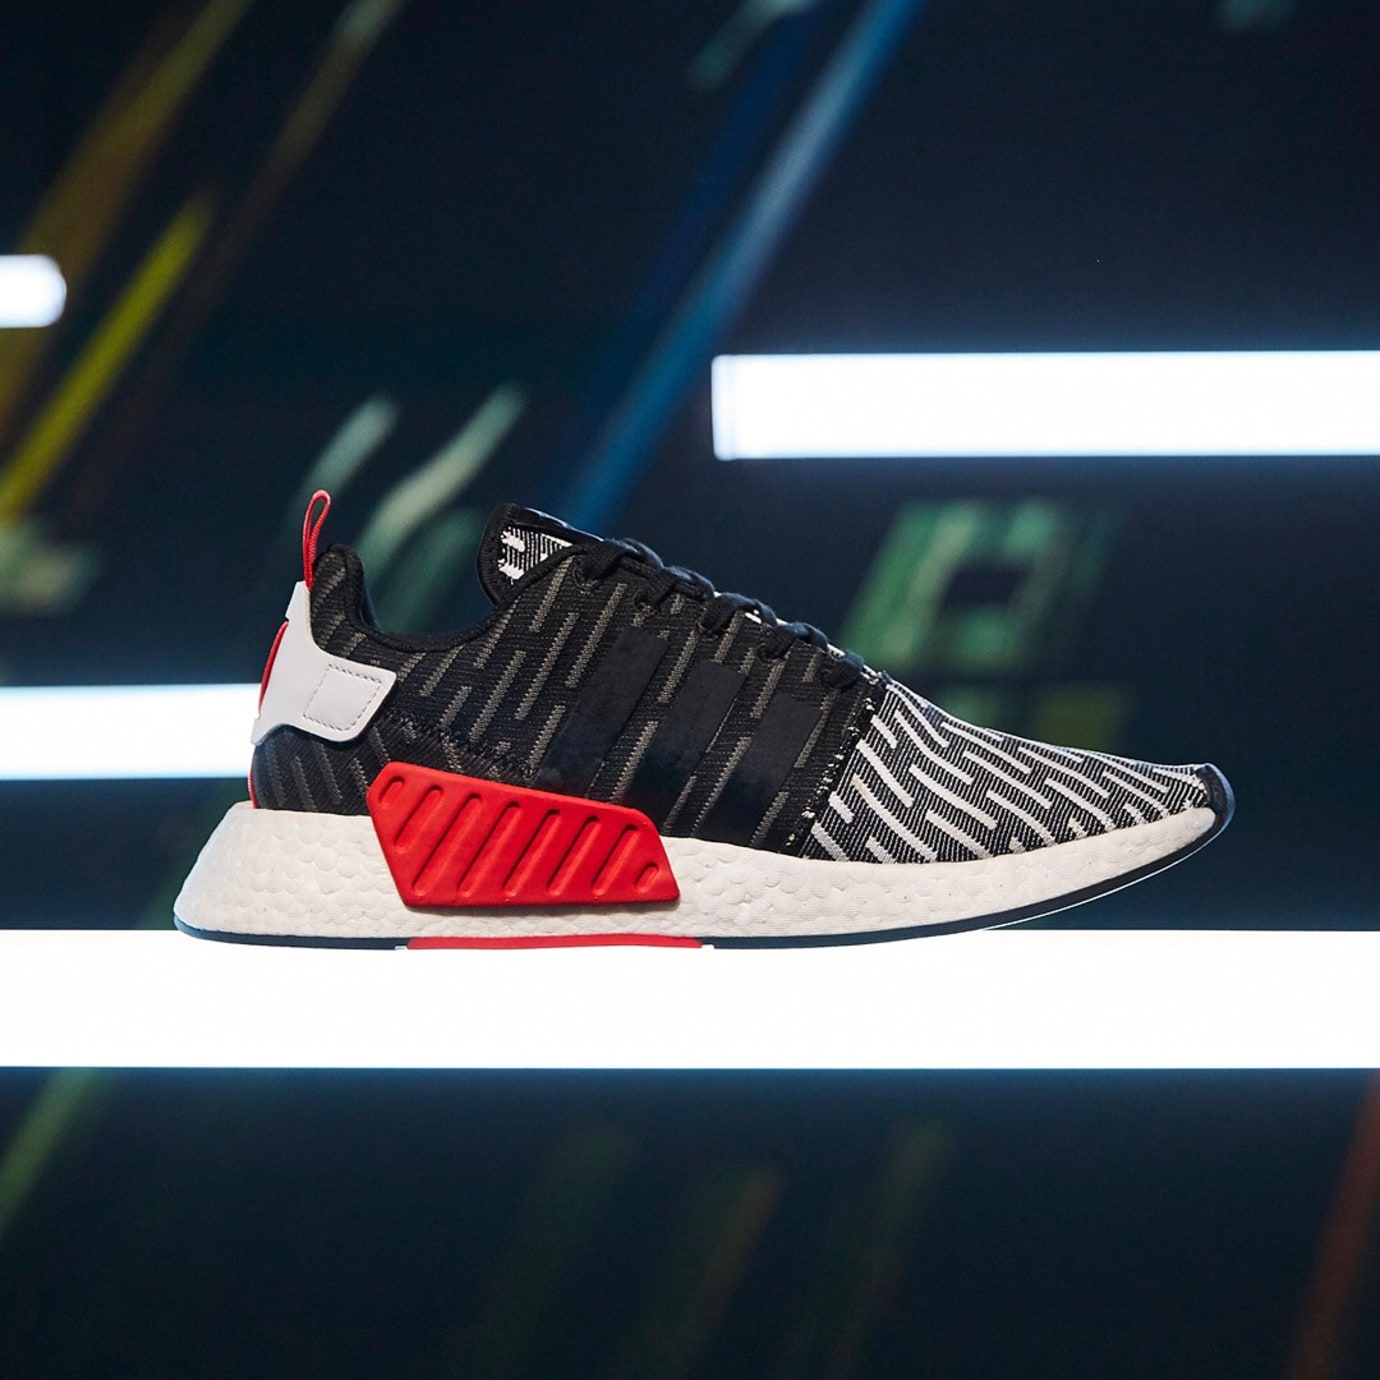 Adidas NMD R2 JD Sports Exclusive Release Date | Sole Collector